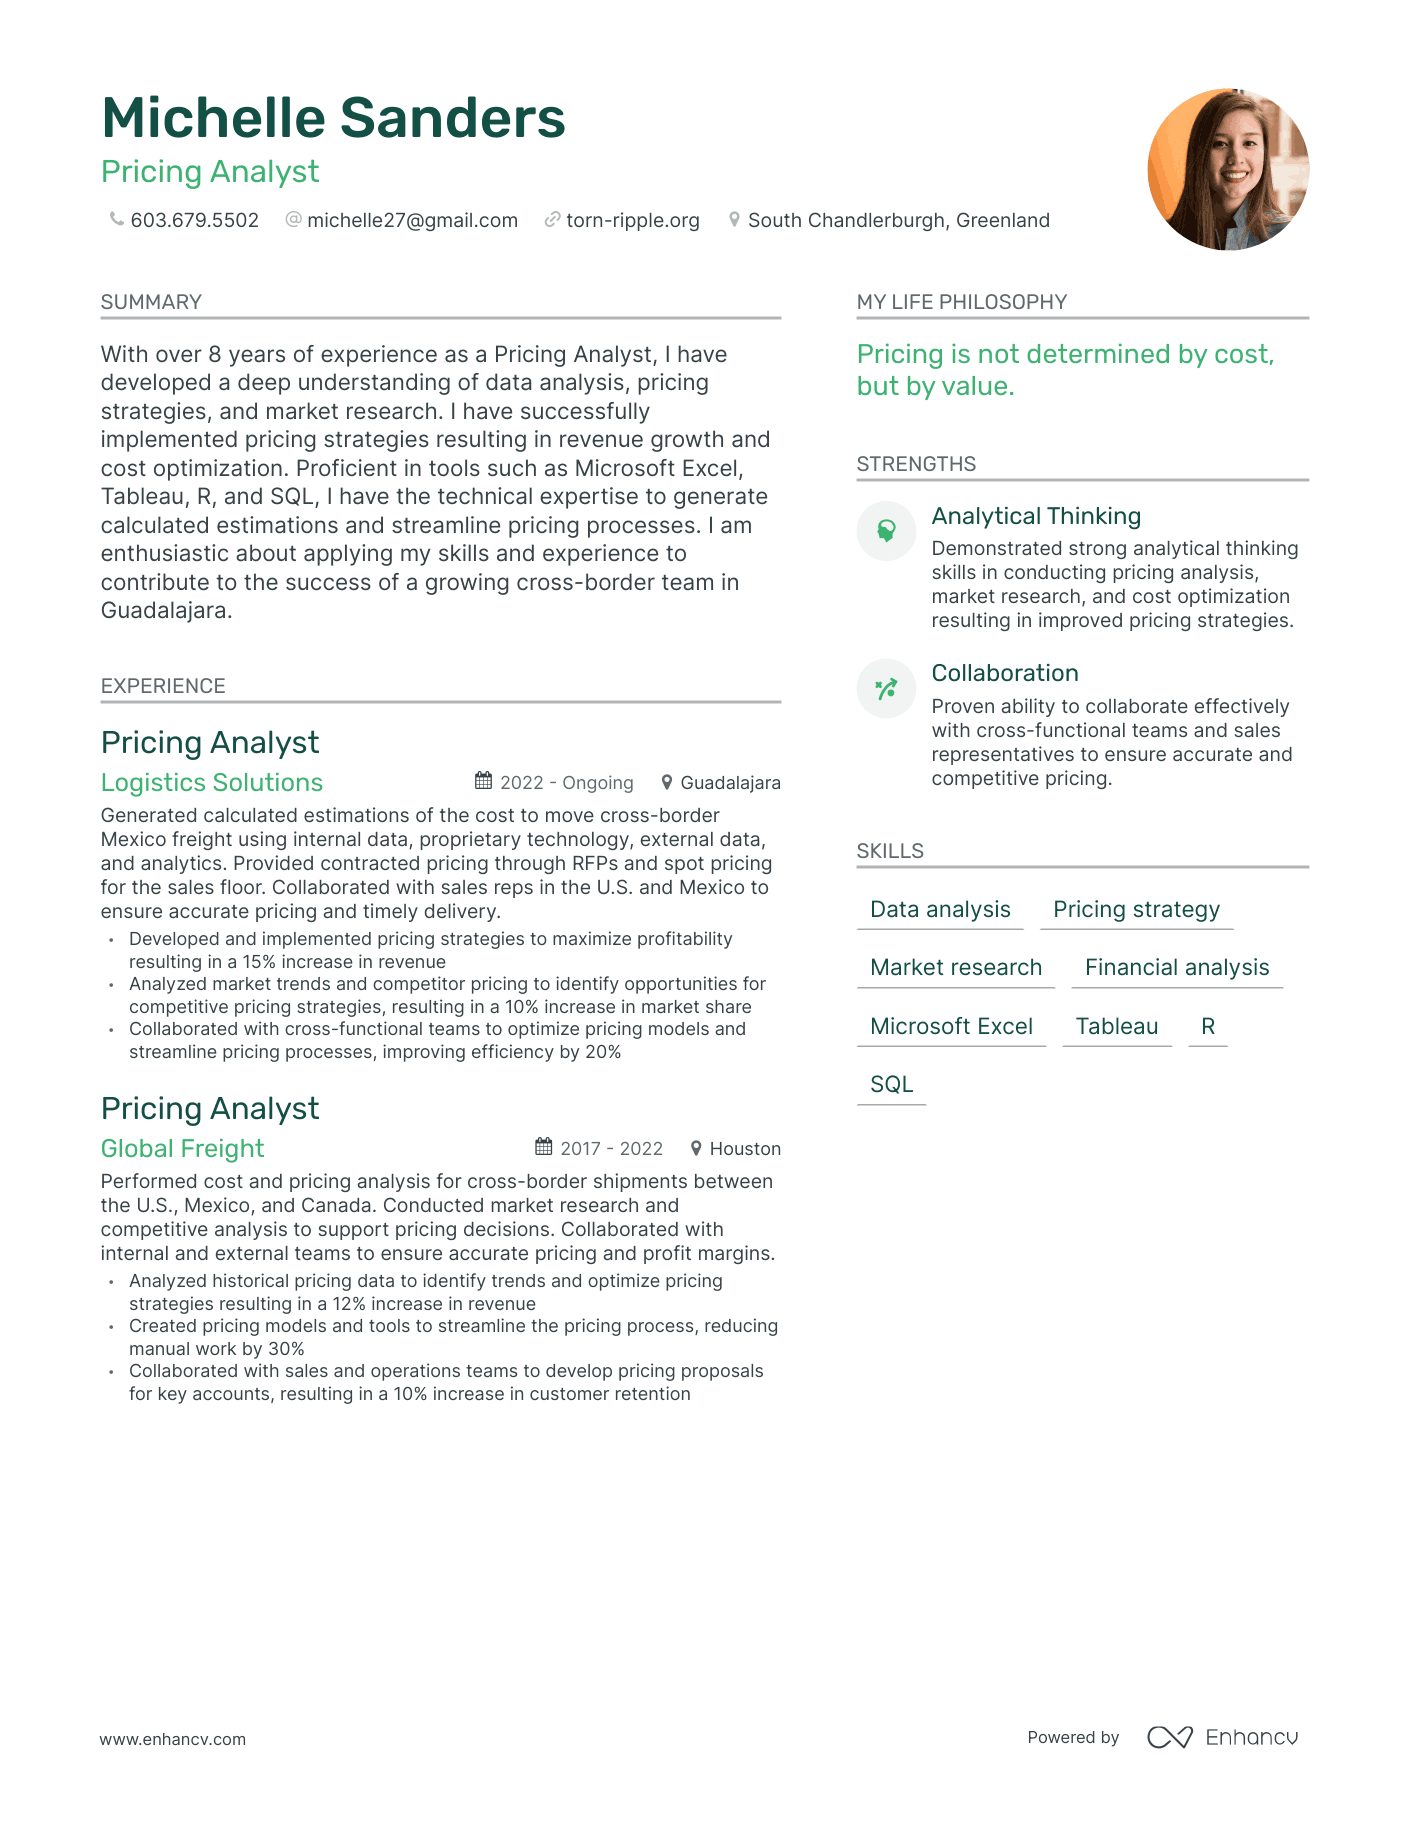 Pricing Analyst resume example